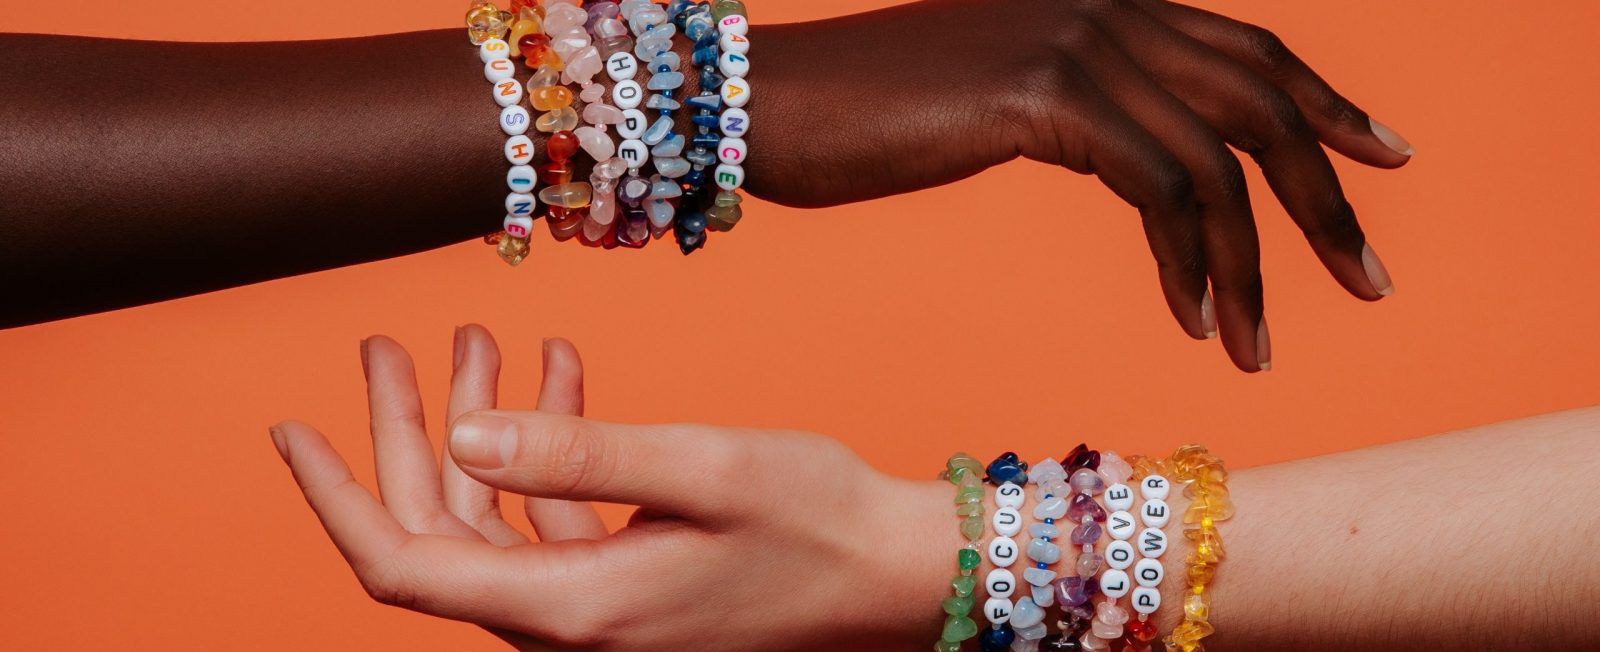 Crystal healing may be all wishful thinking — but here’s why that’s okay